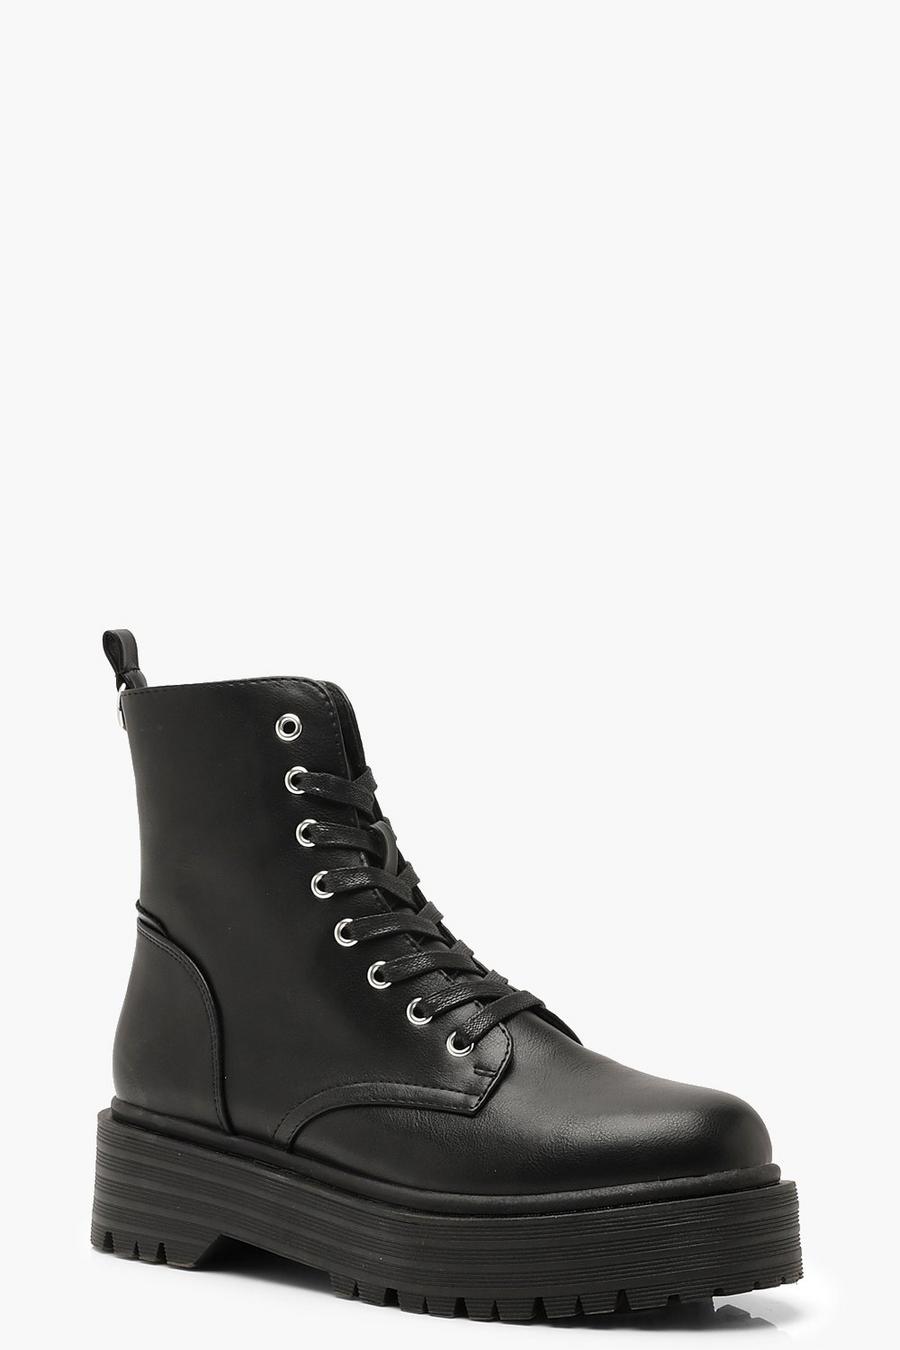 Black Chunky Sole Lace Up Hiker Boots image number 1